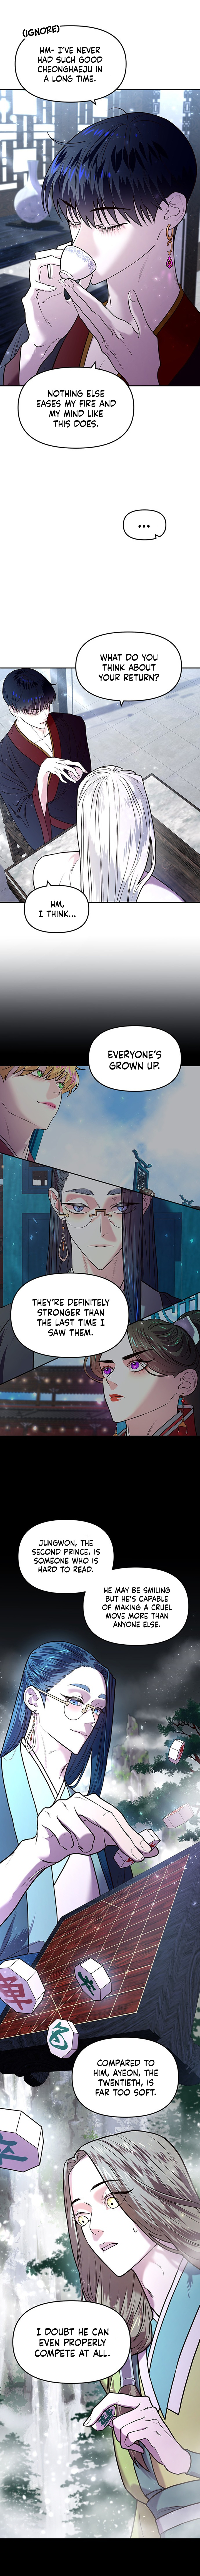 The Prince Of Myeolyeong - Page 5